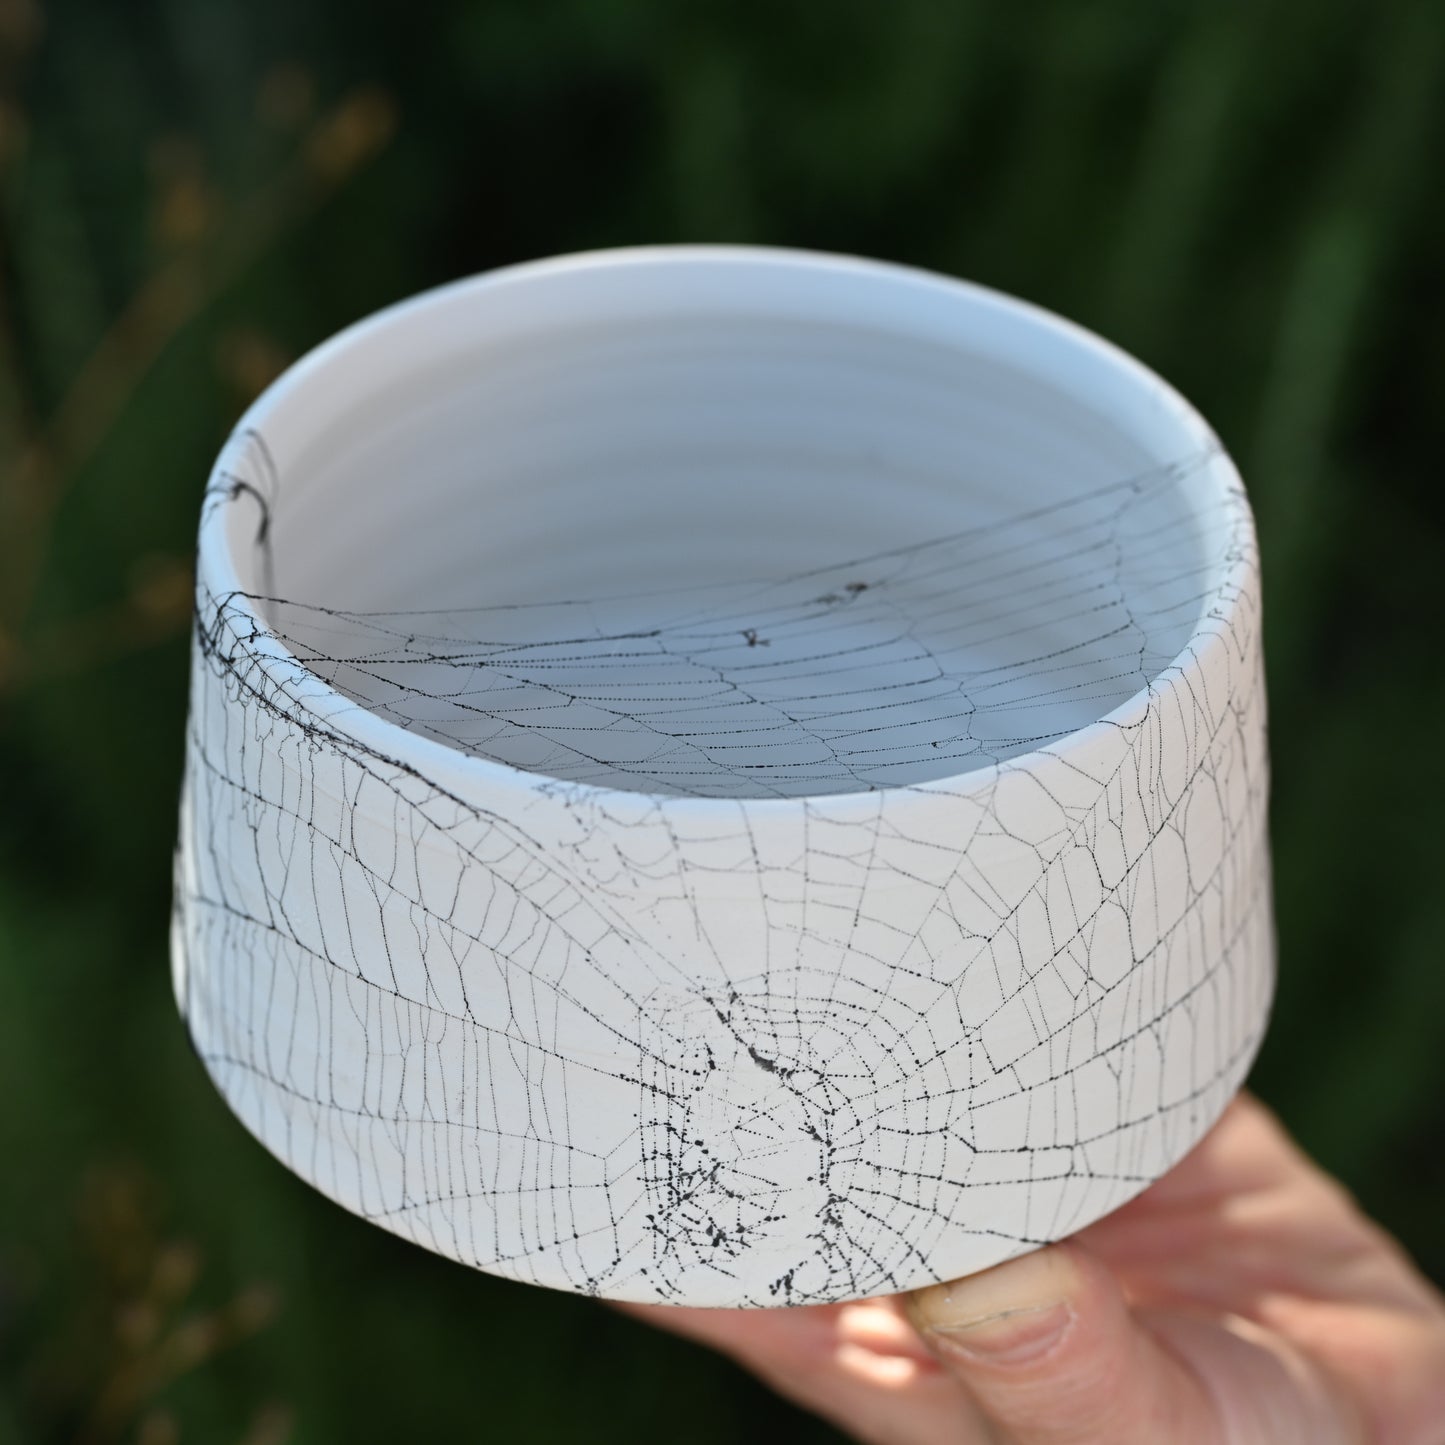 Web on Clay (237), Collected October 02, 2022